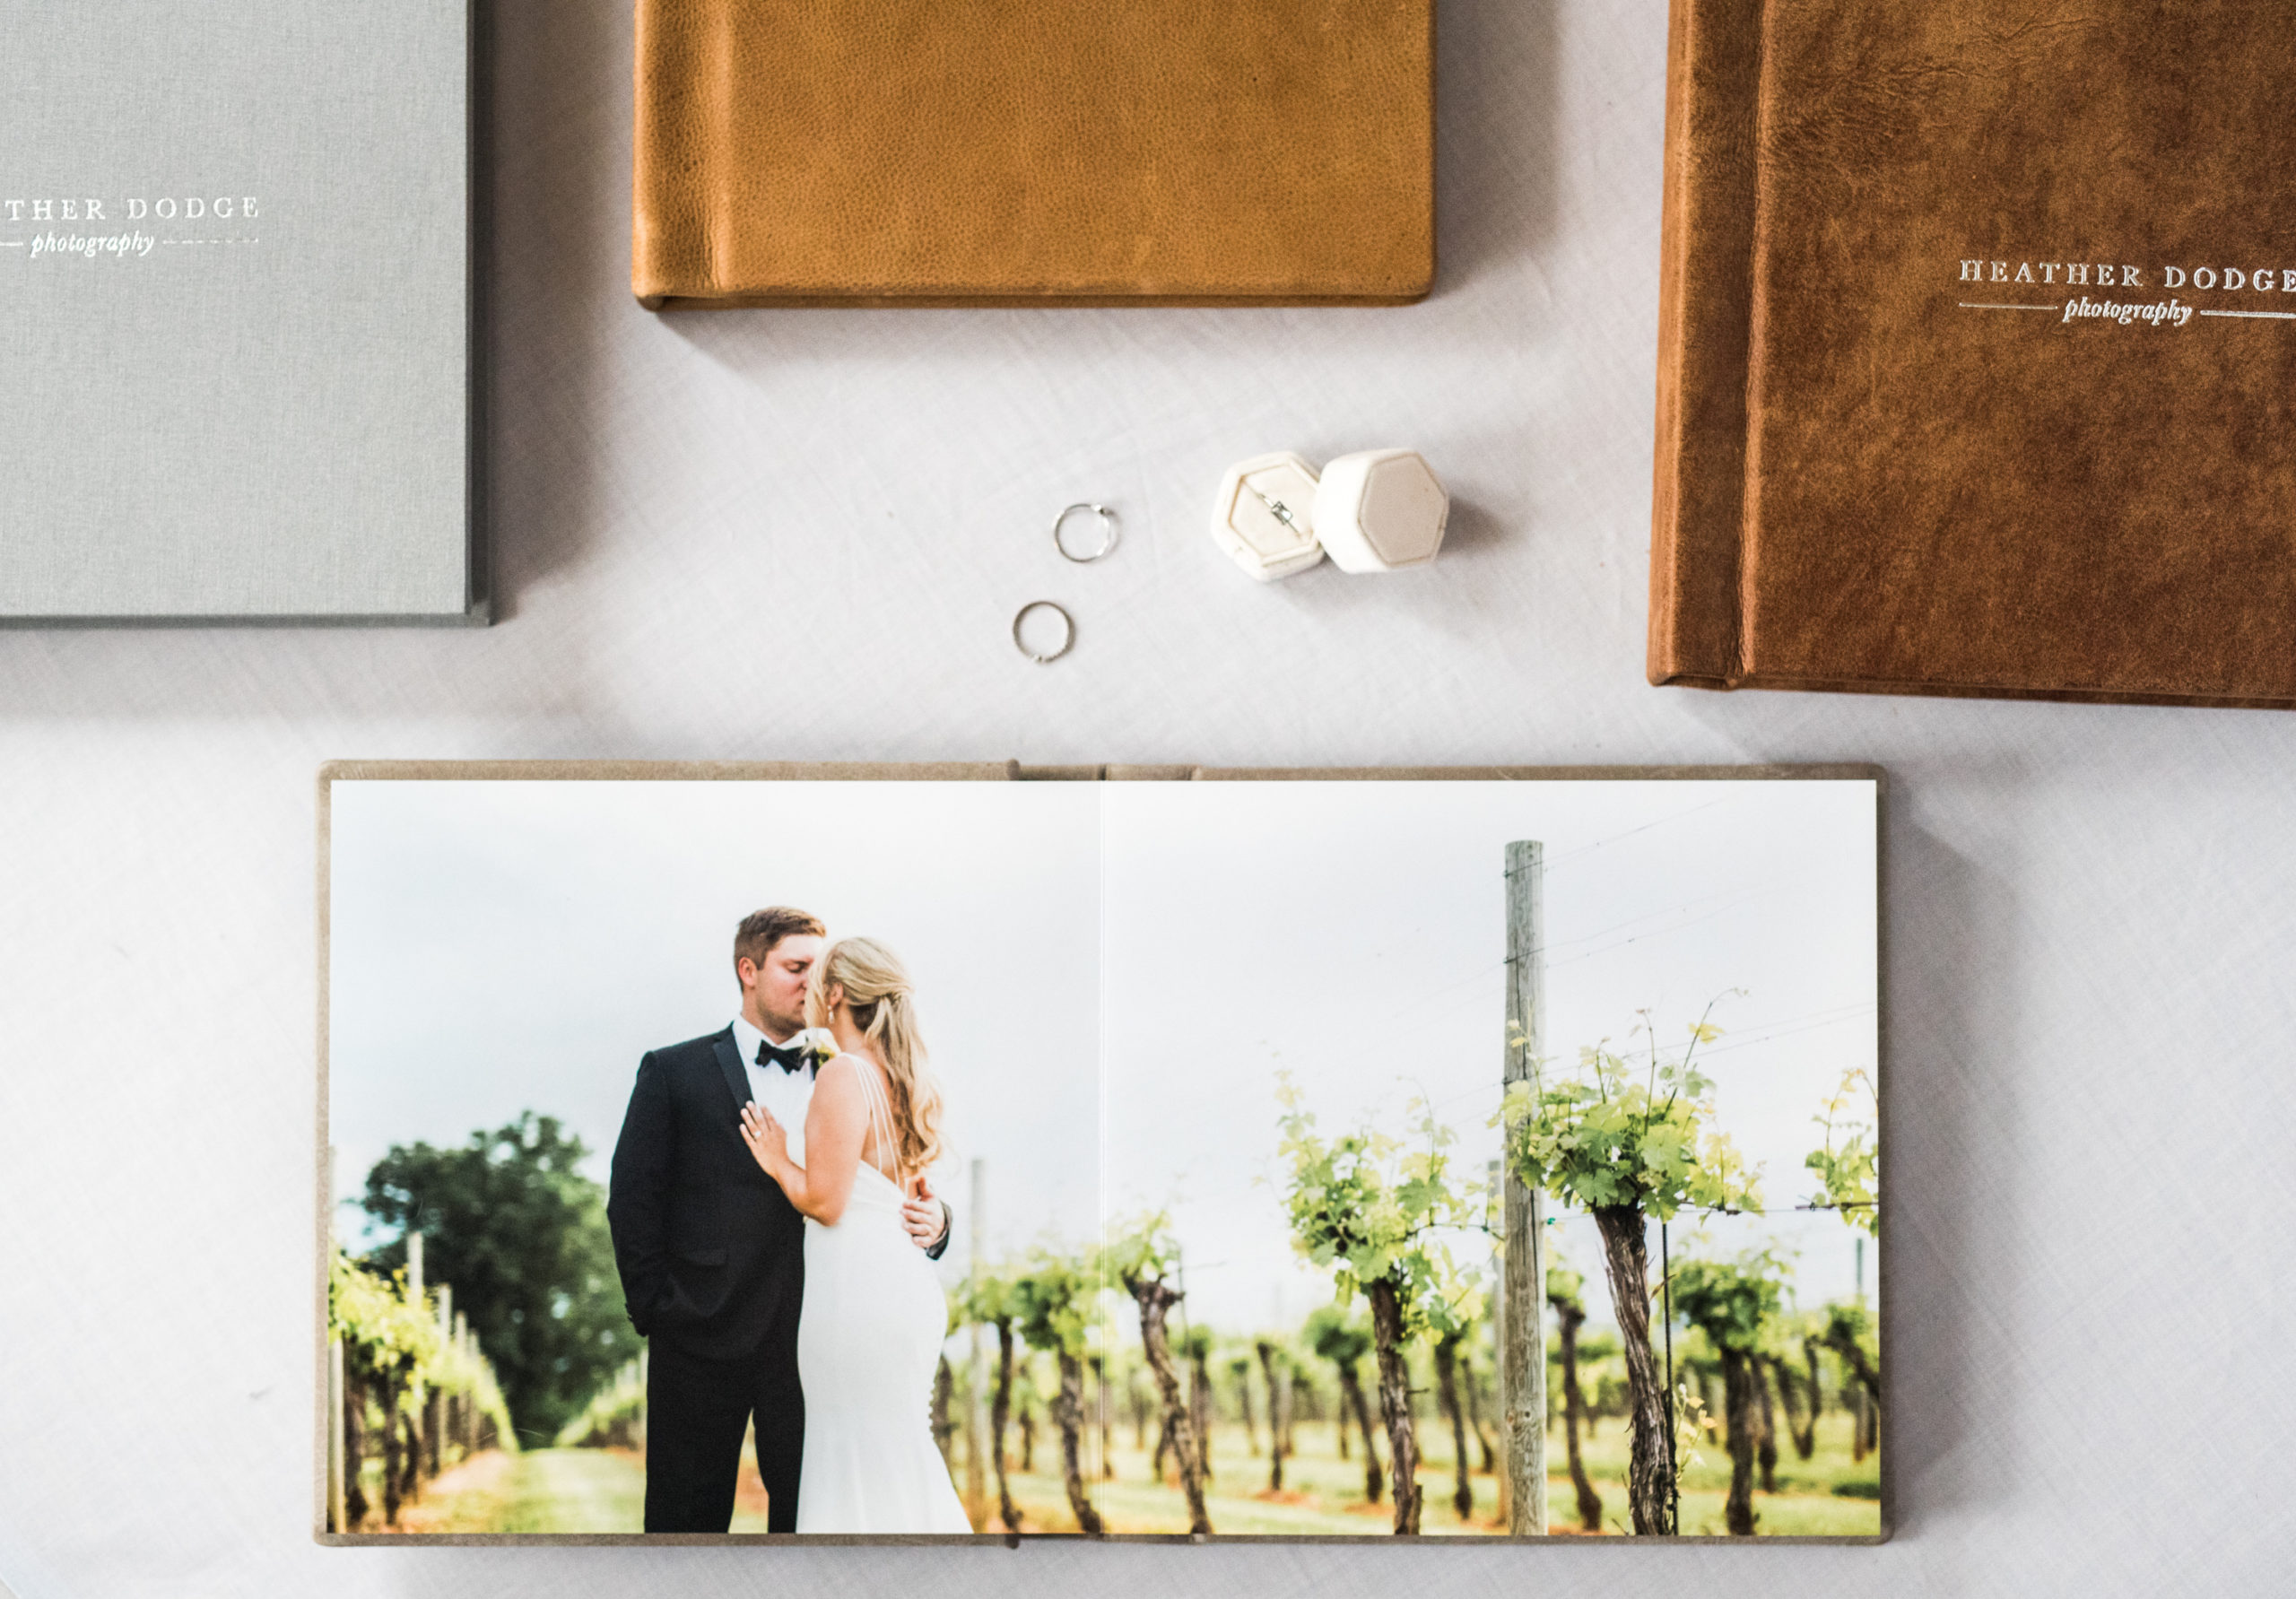 How Many Photos Can I Put In A Wedding Album?